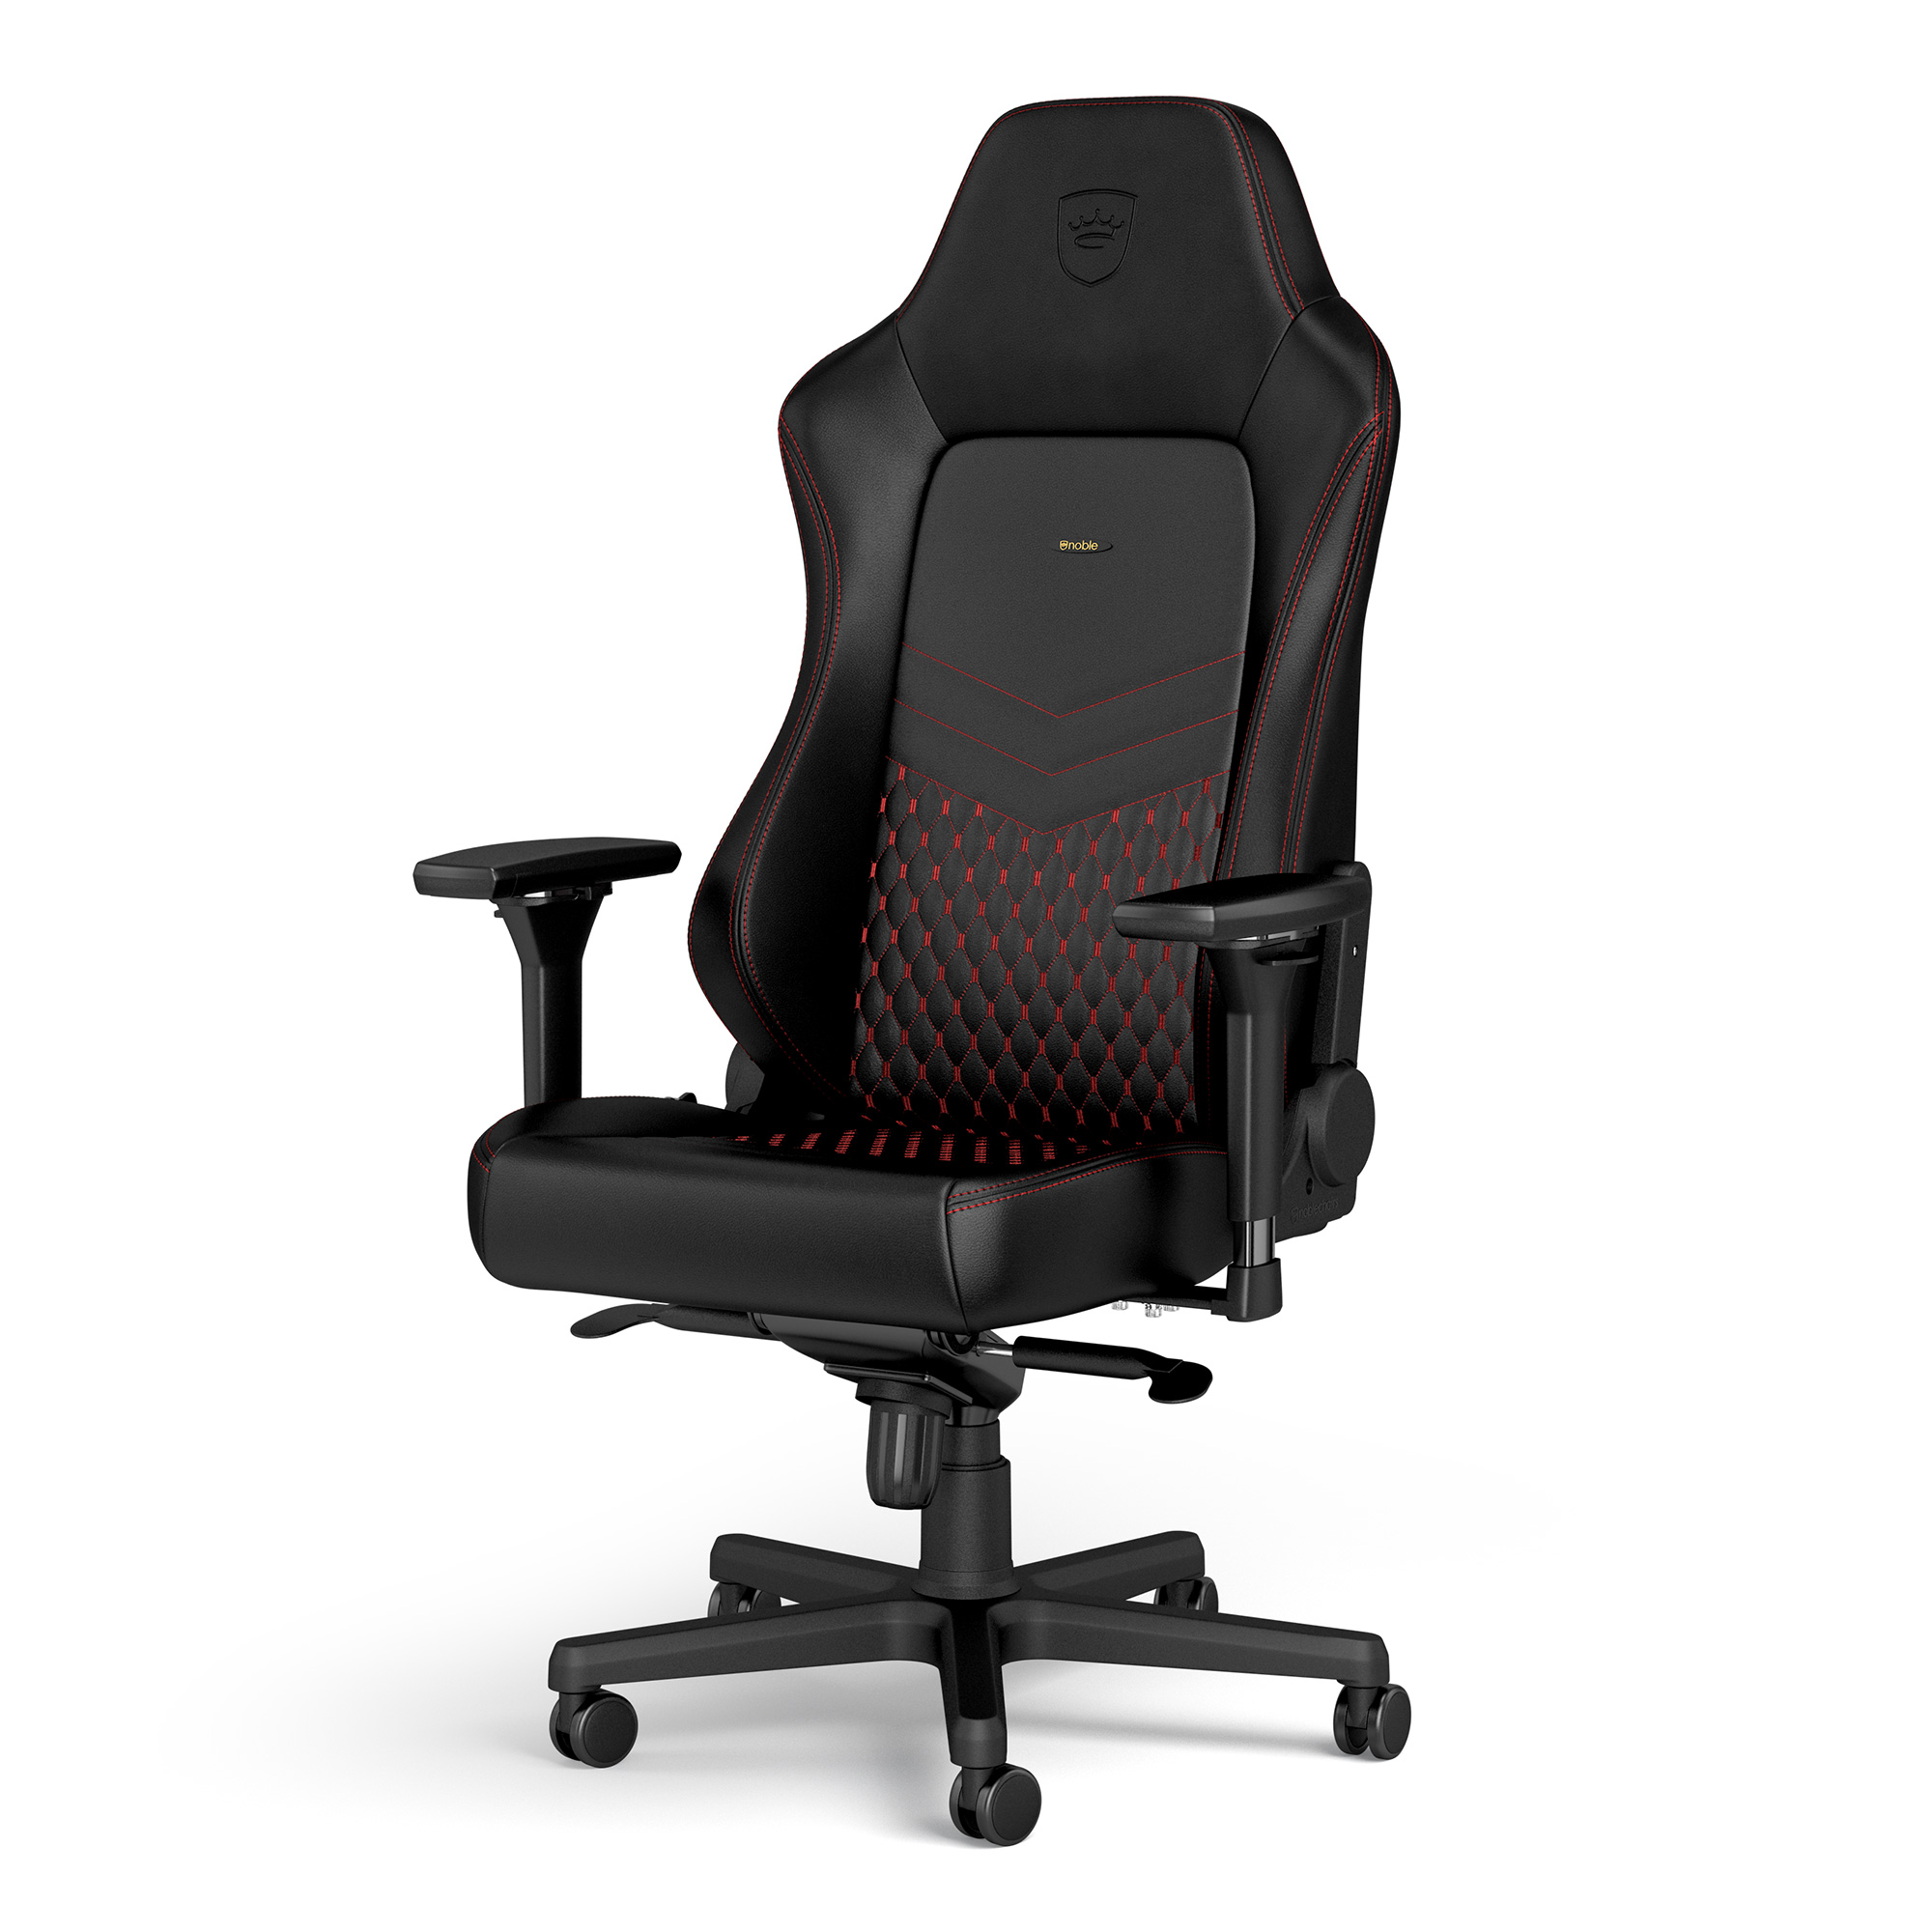 noblechairs - noblechairs HERO Real Leather Gaming Chair - Black/Red